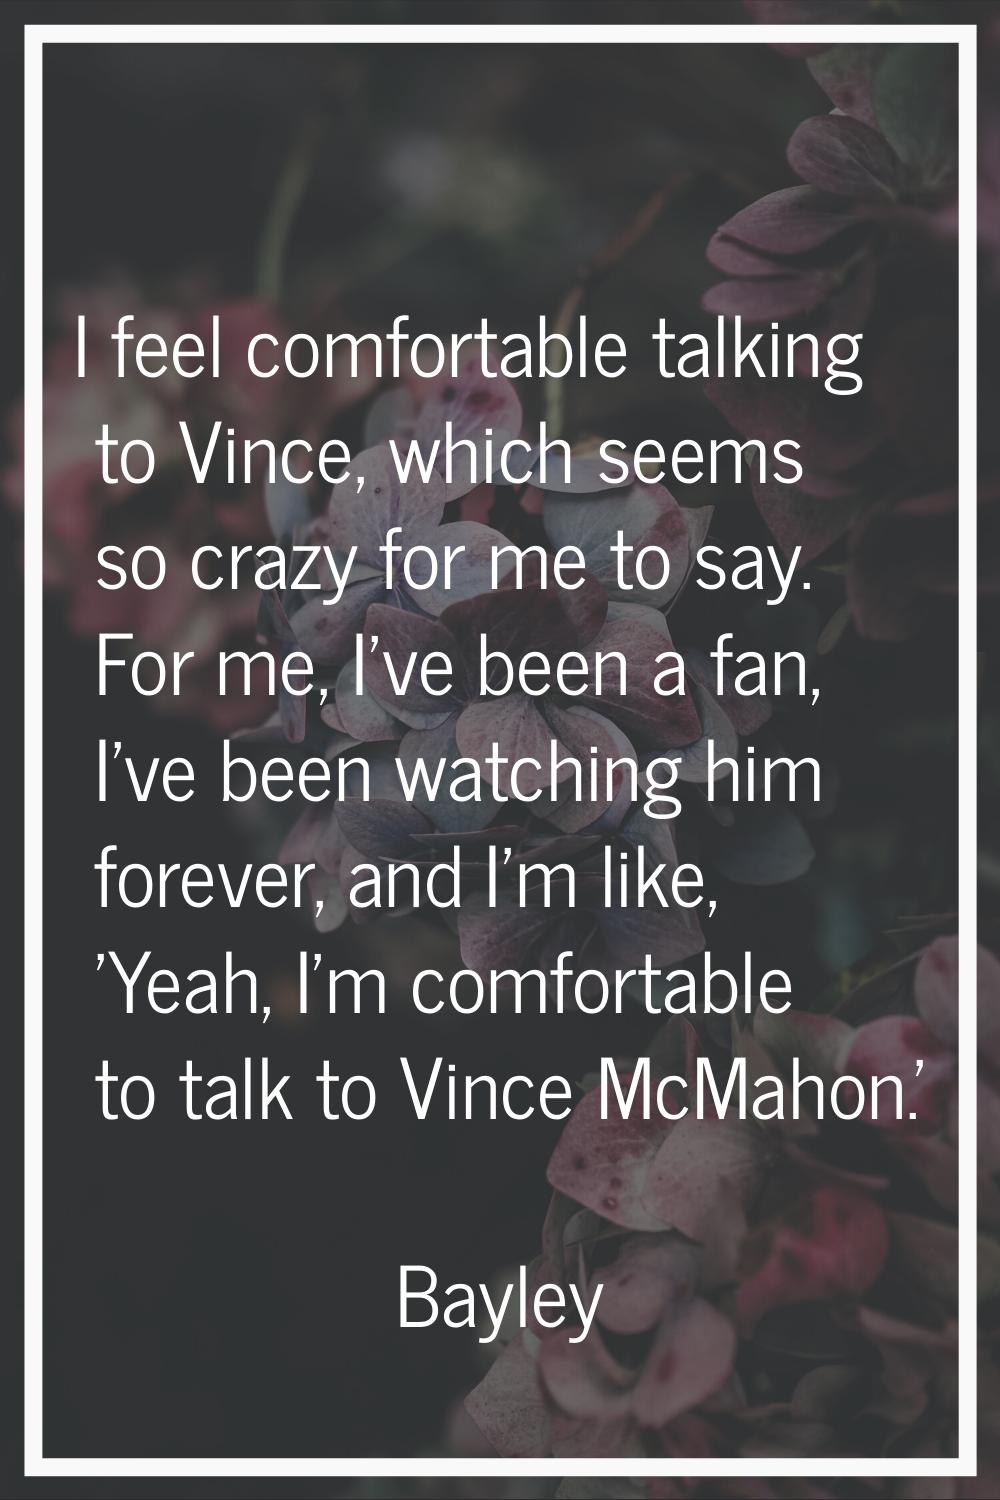 I feel comfortable talking to Vince, which seems so crazy for me to say. For me, I've been a fan, I